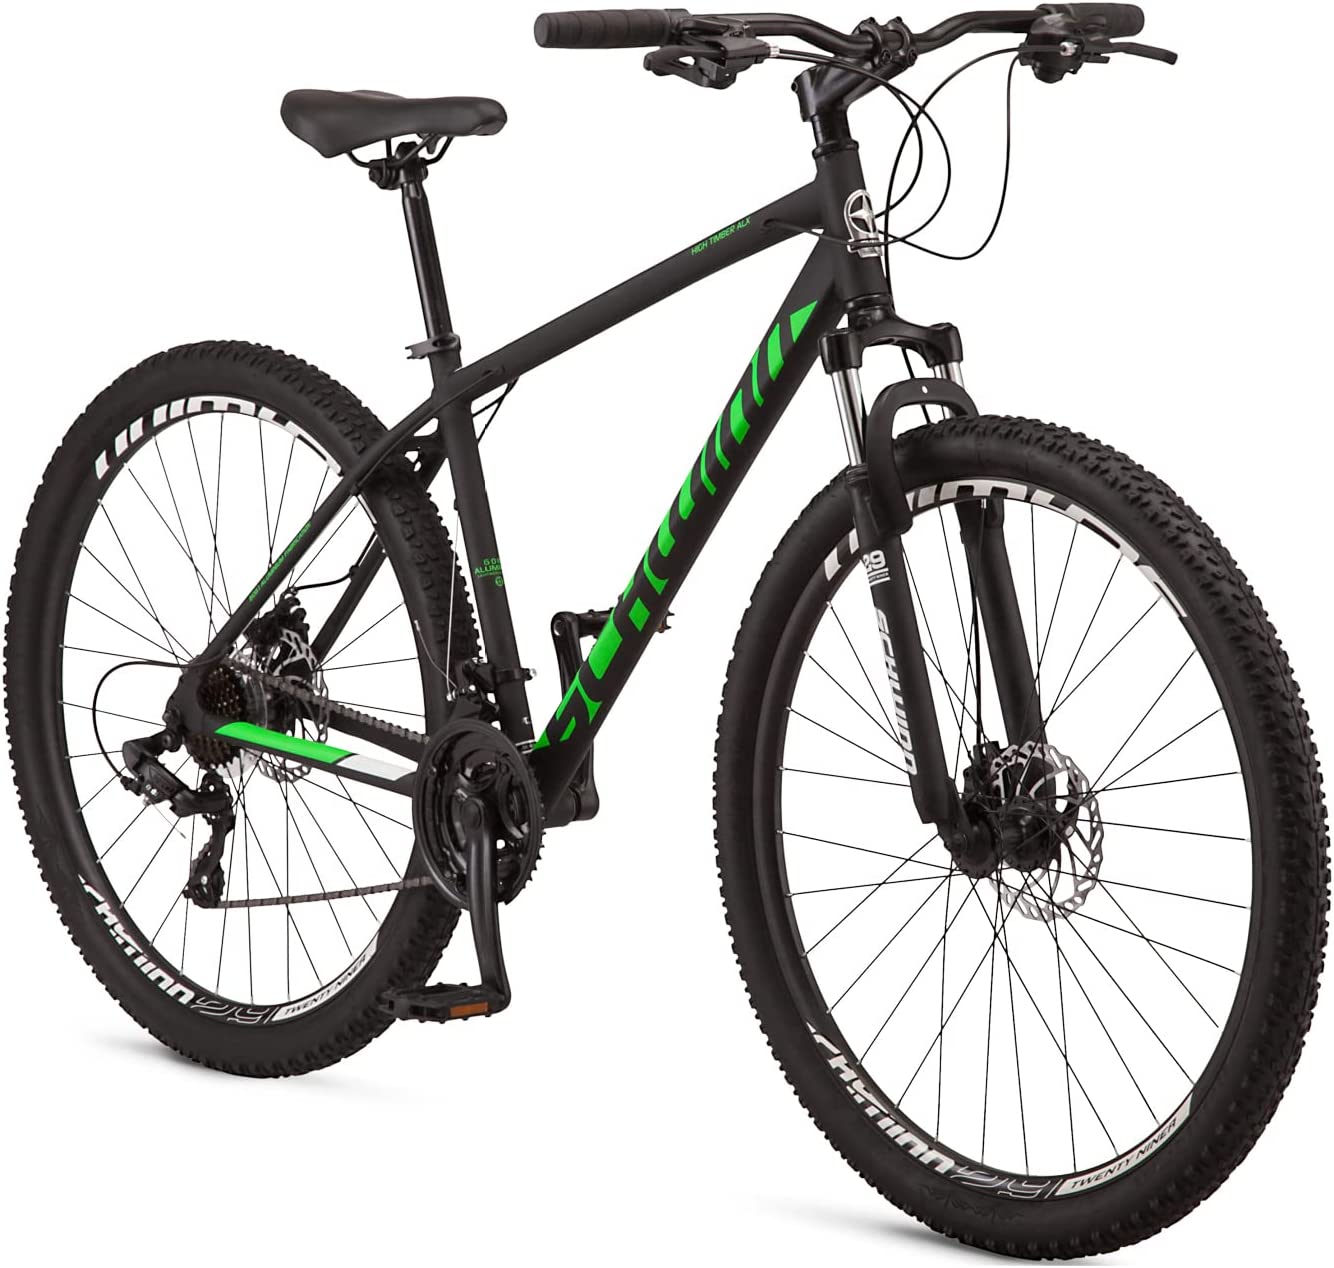 Get Your Roll On this Summer with the Top Mountain Bikes